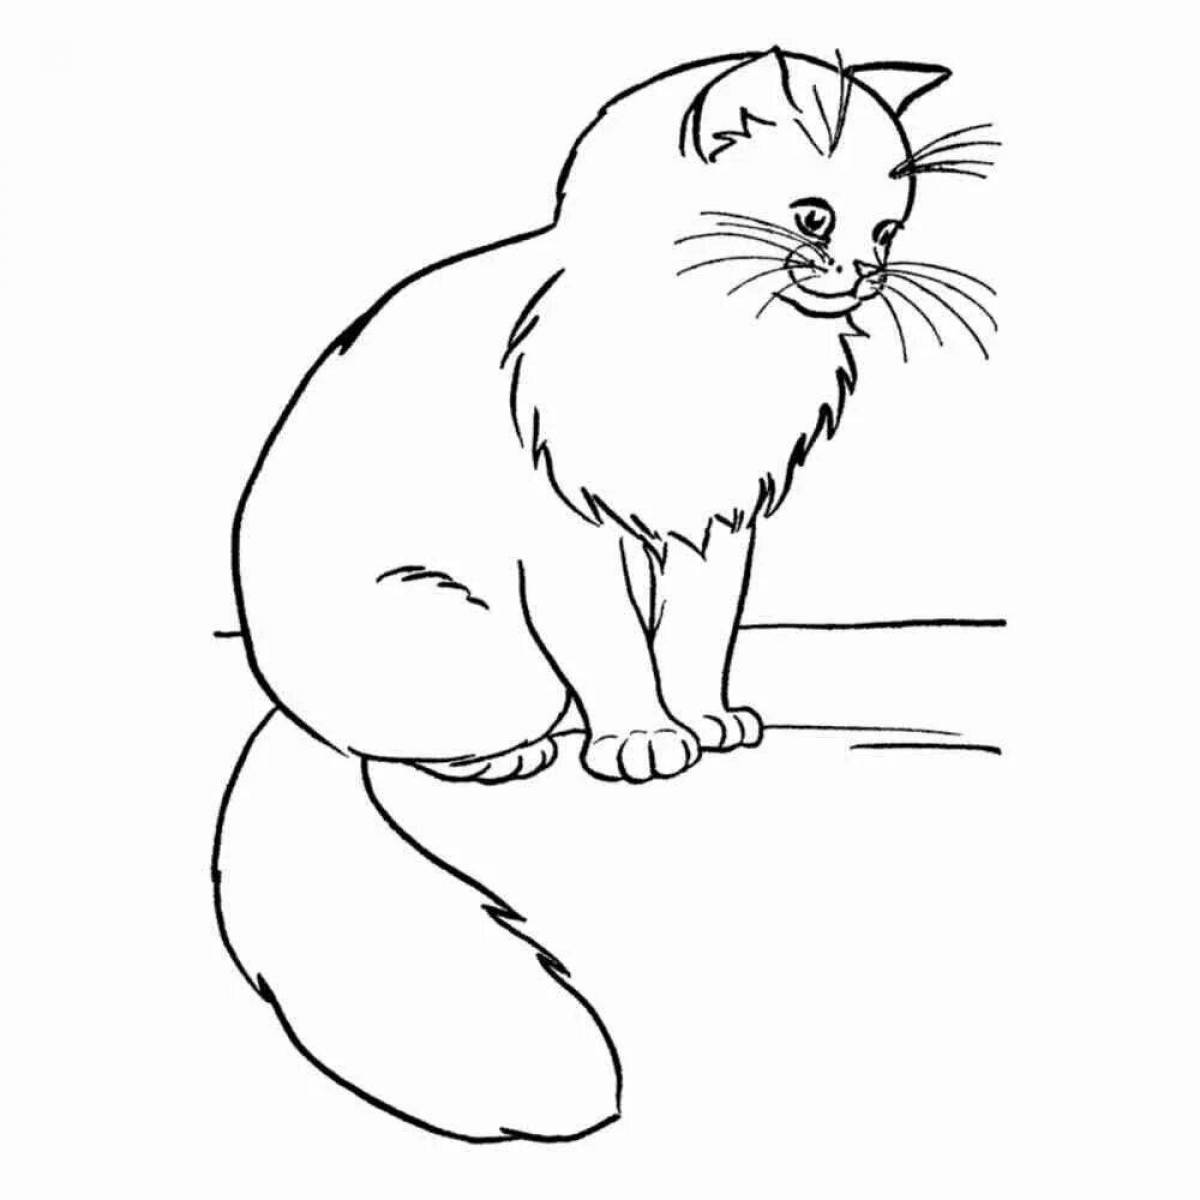 Curious cats coloring pages